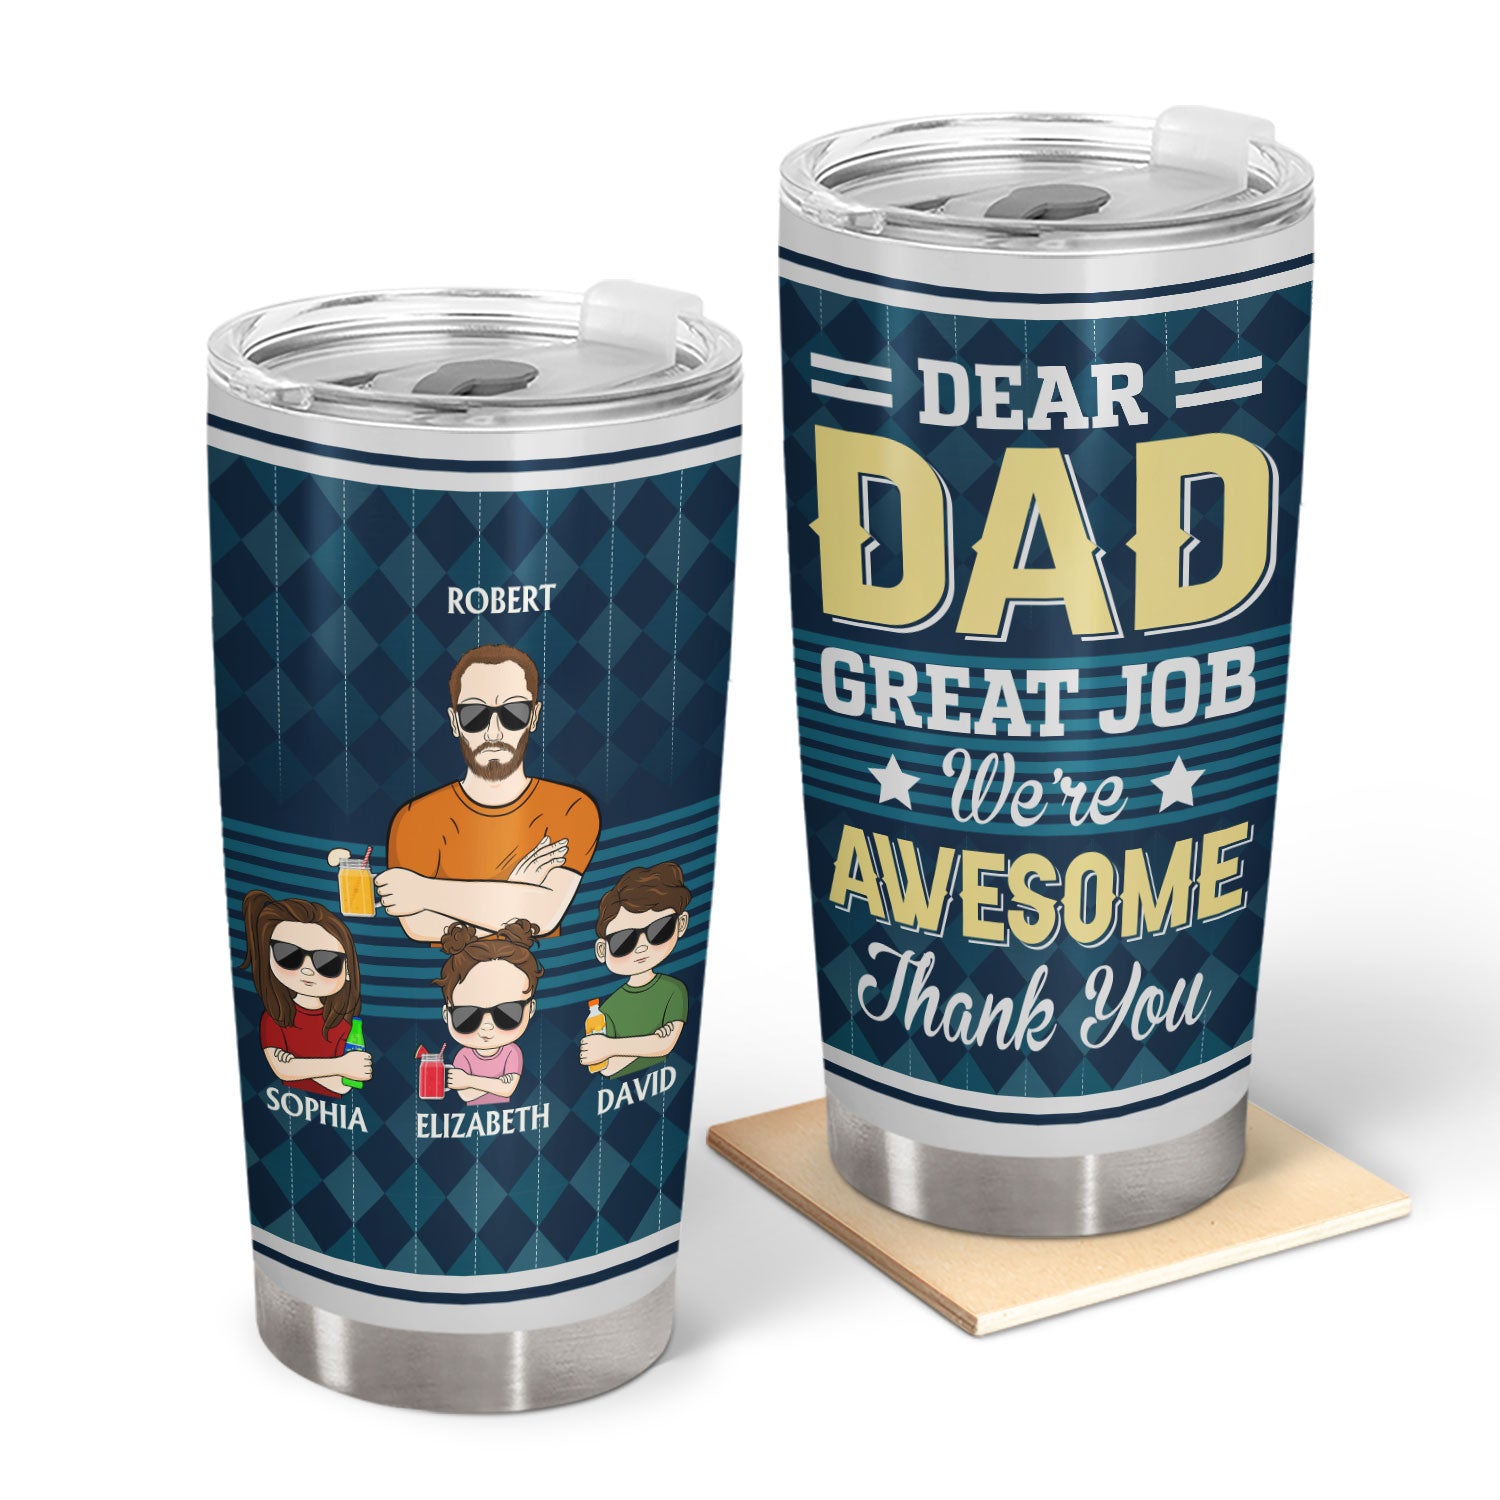 Dear Dad Great Job We're Awesome Thank You Vintage - Funny, Birthday Gift For Father, Husband - Personalized Custom Tumbler